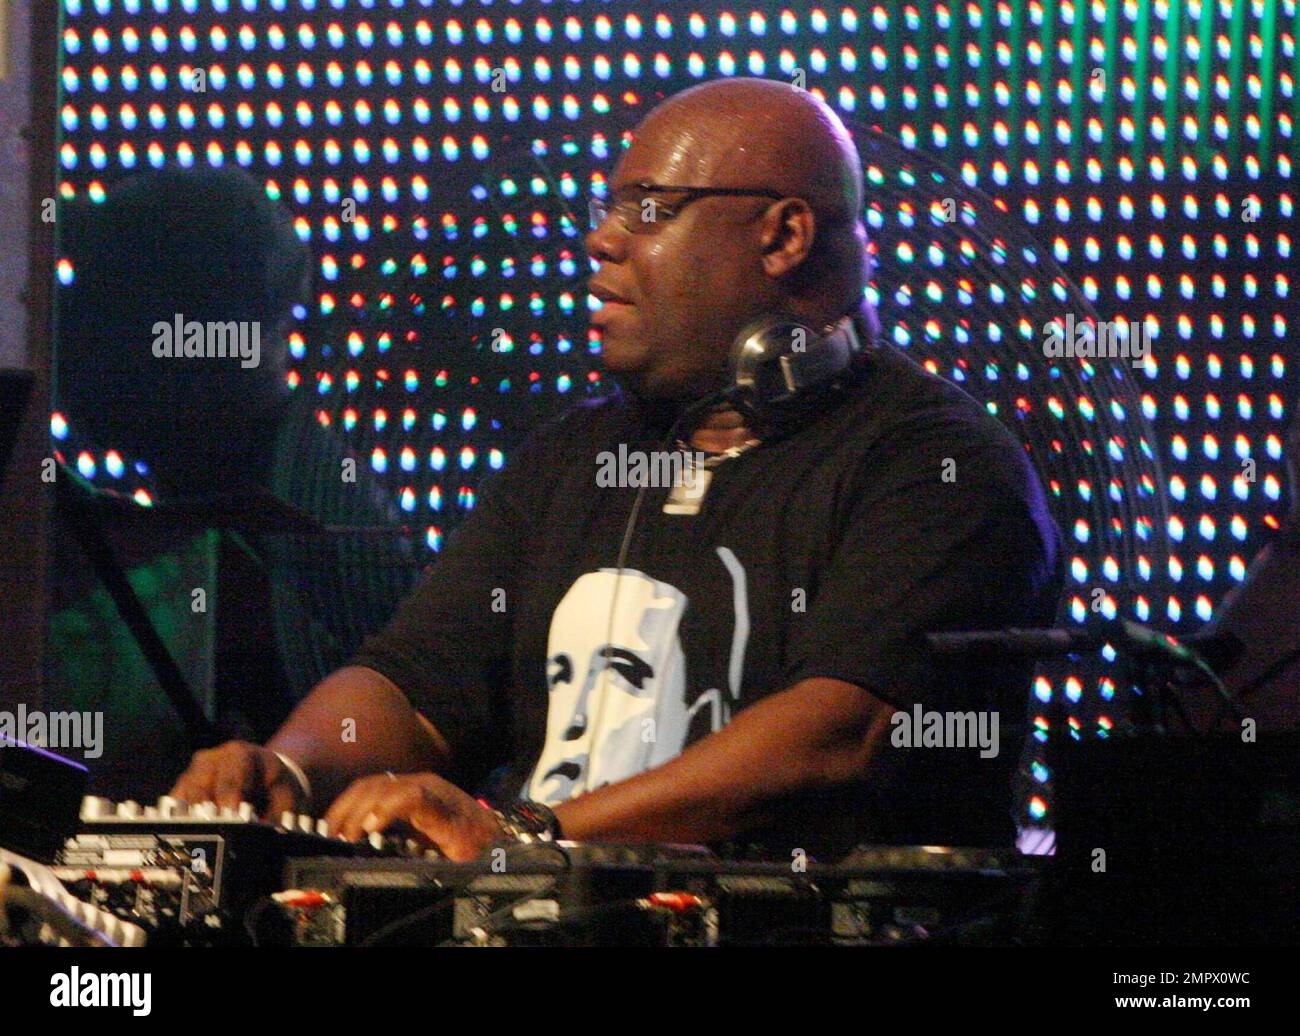 British techno and house DJ Carl Cox performs on day two of the Ultra Music Festival (UMF), the world's leading two-day electronic music experience.  South Florida's favorite music festival, internationally renowned for its memorable live performances and DJ sets from the world's top electronic and alternative rock artists, takes place during the 24th annual Winter Music Conference at the beautiful waterfront location of Bicentennial Park in downtown Miami (the same grounds it has occupied since 2006). Miami, FL. 3/28/09. Stock Photo